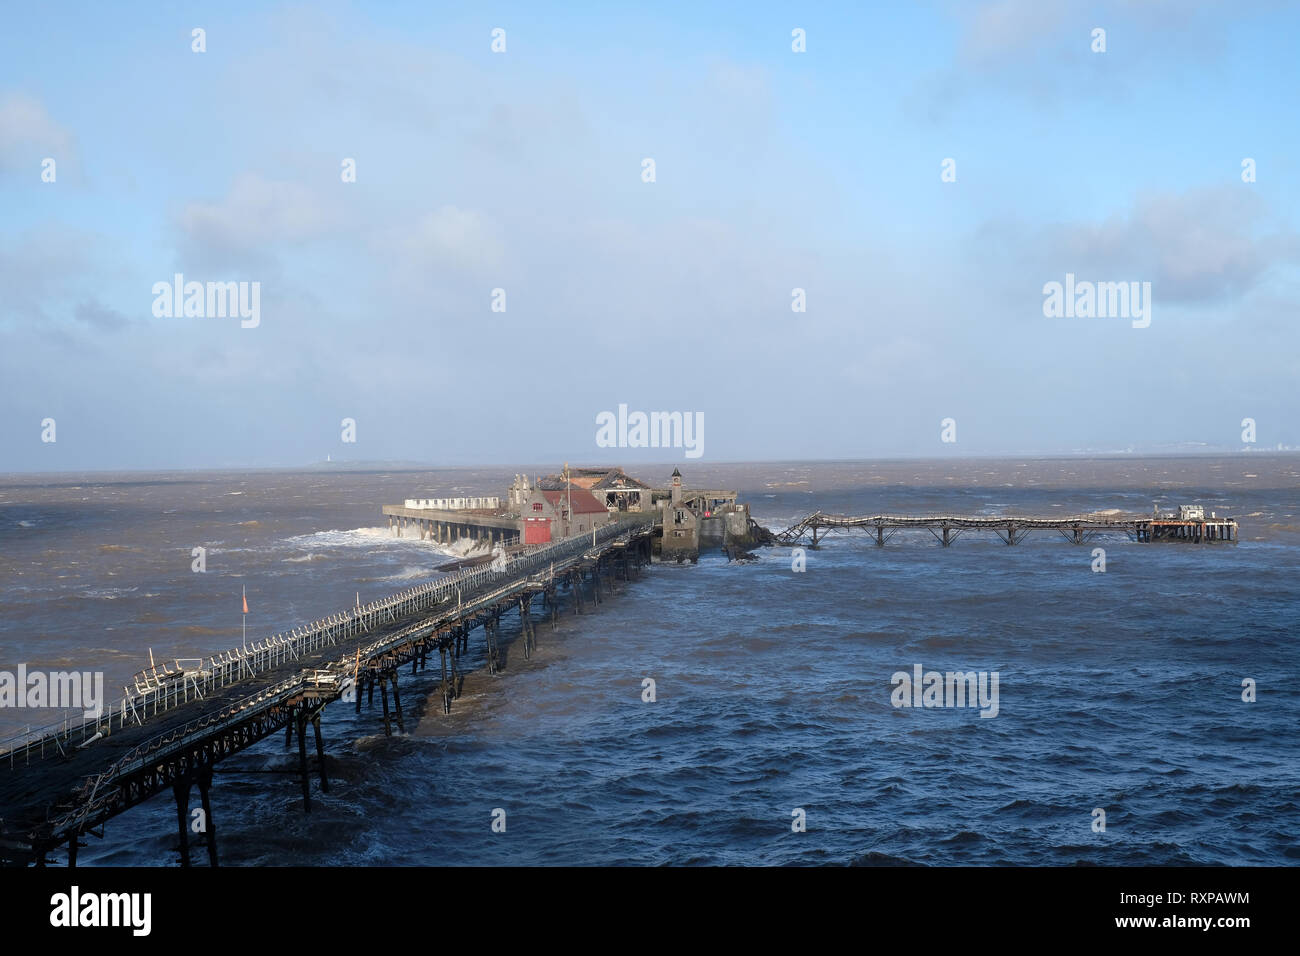 March 2019 - Rough seas batter the old Birnbeck Pier north of Weston super Mare,Somerset,England, UK Stock Photo